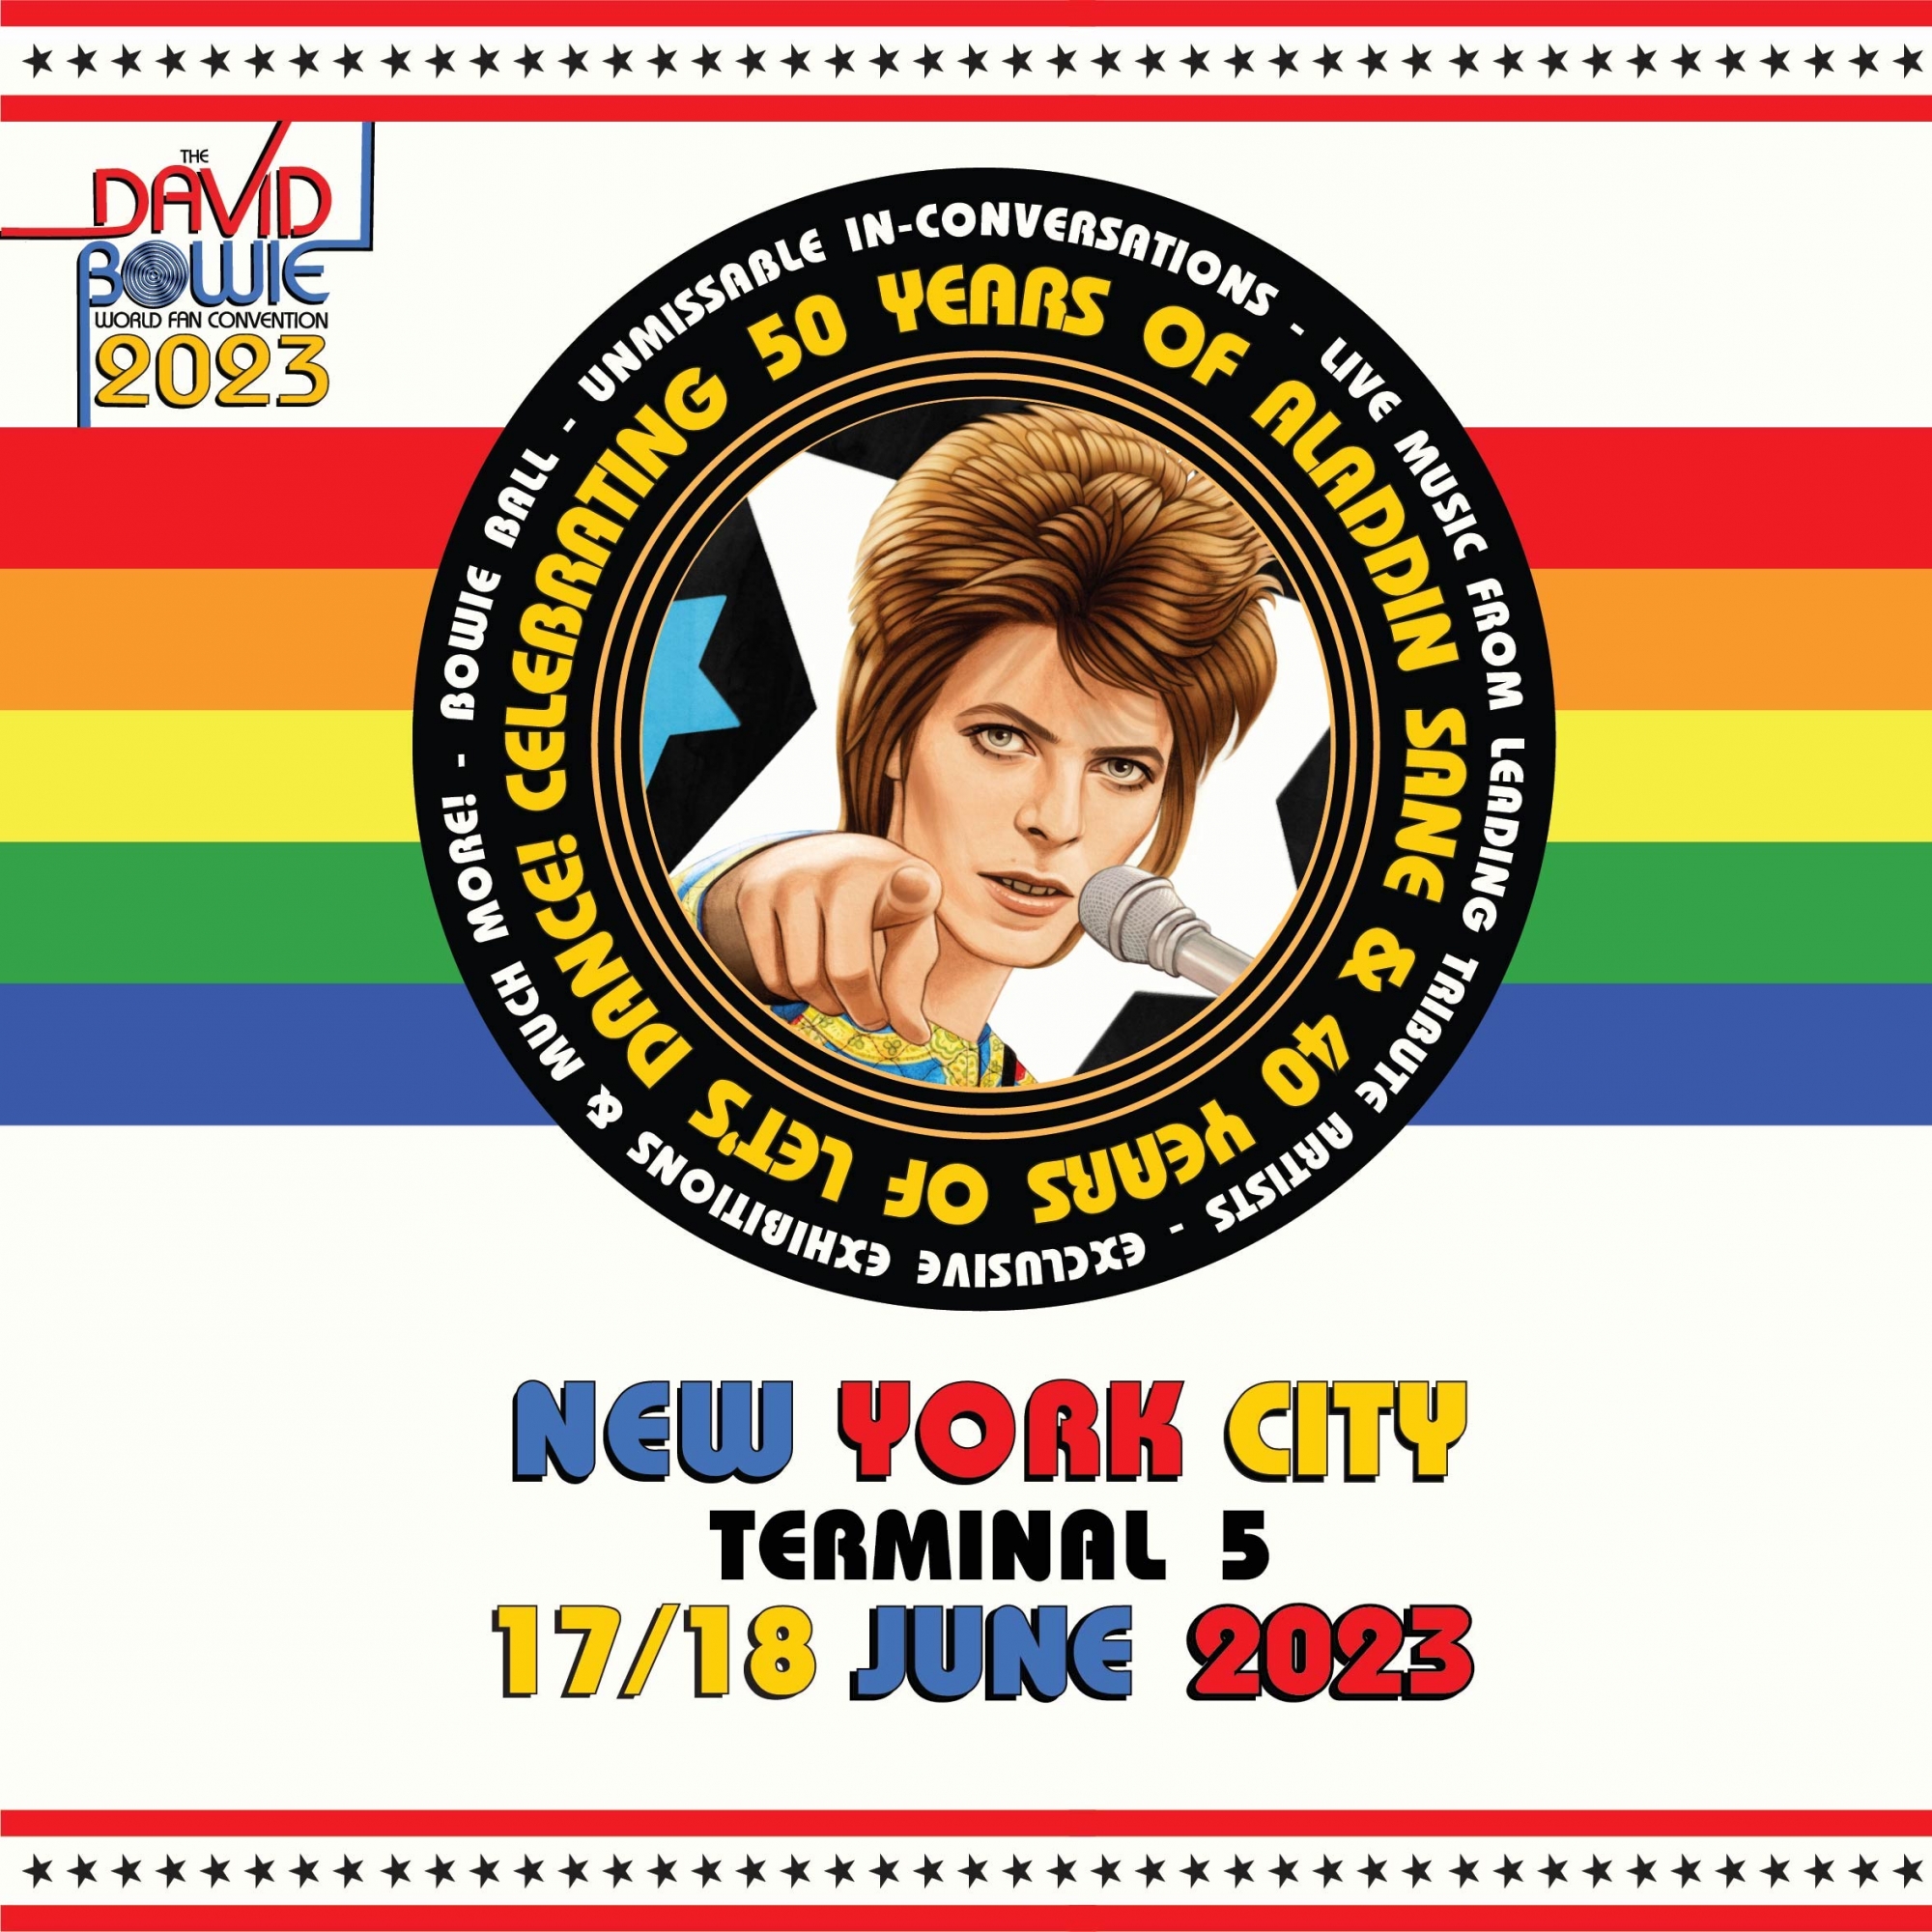 David Bowie World Fan Convention Comes To New York